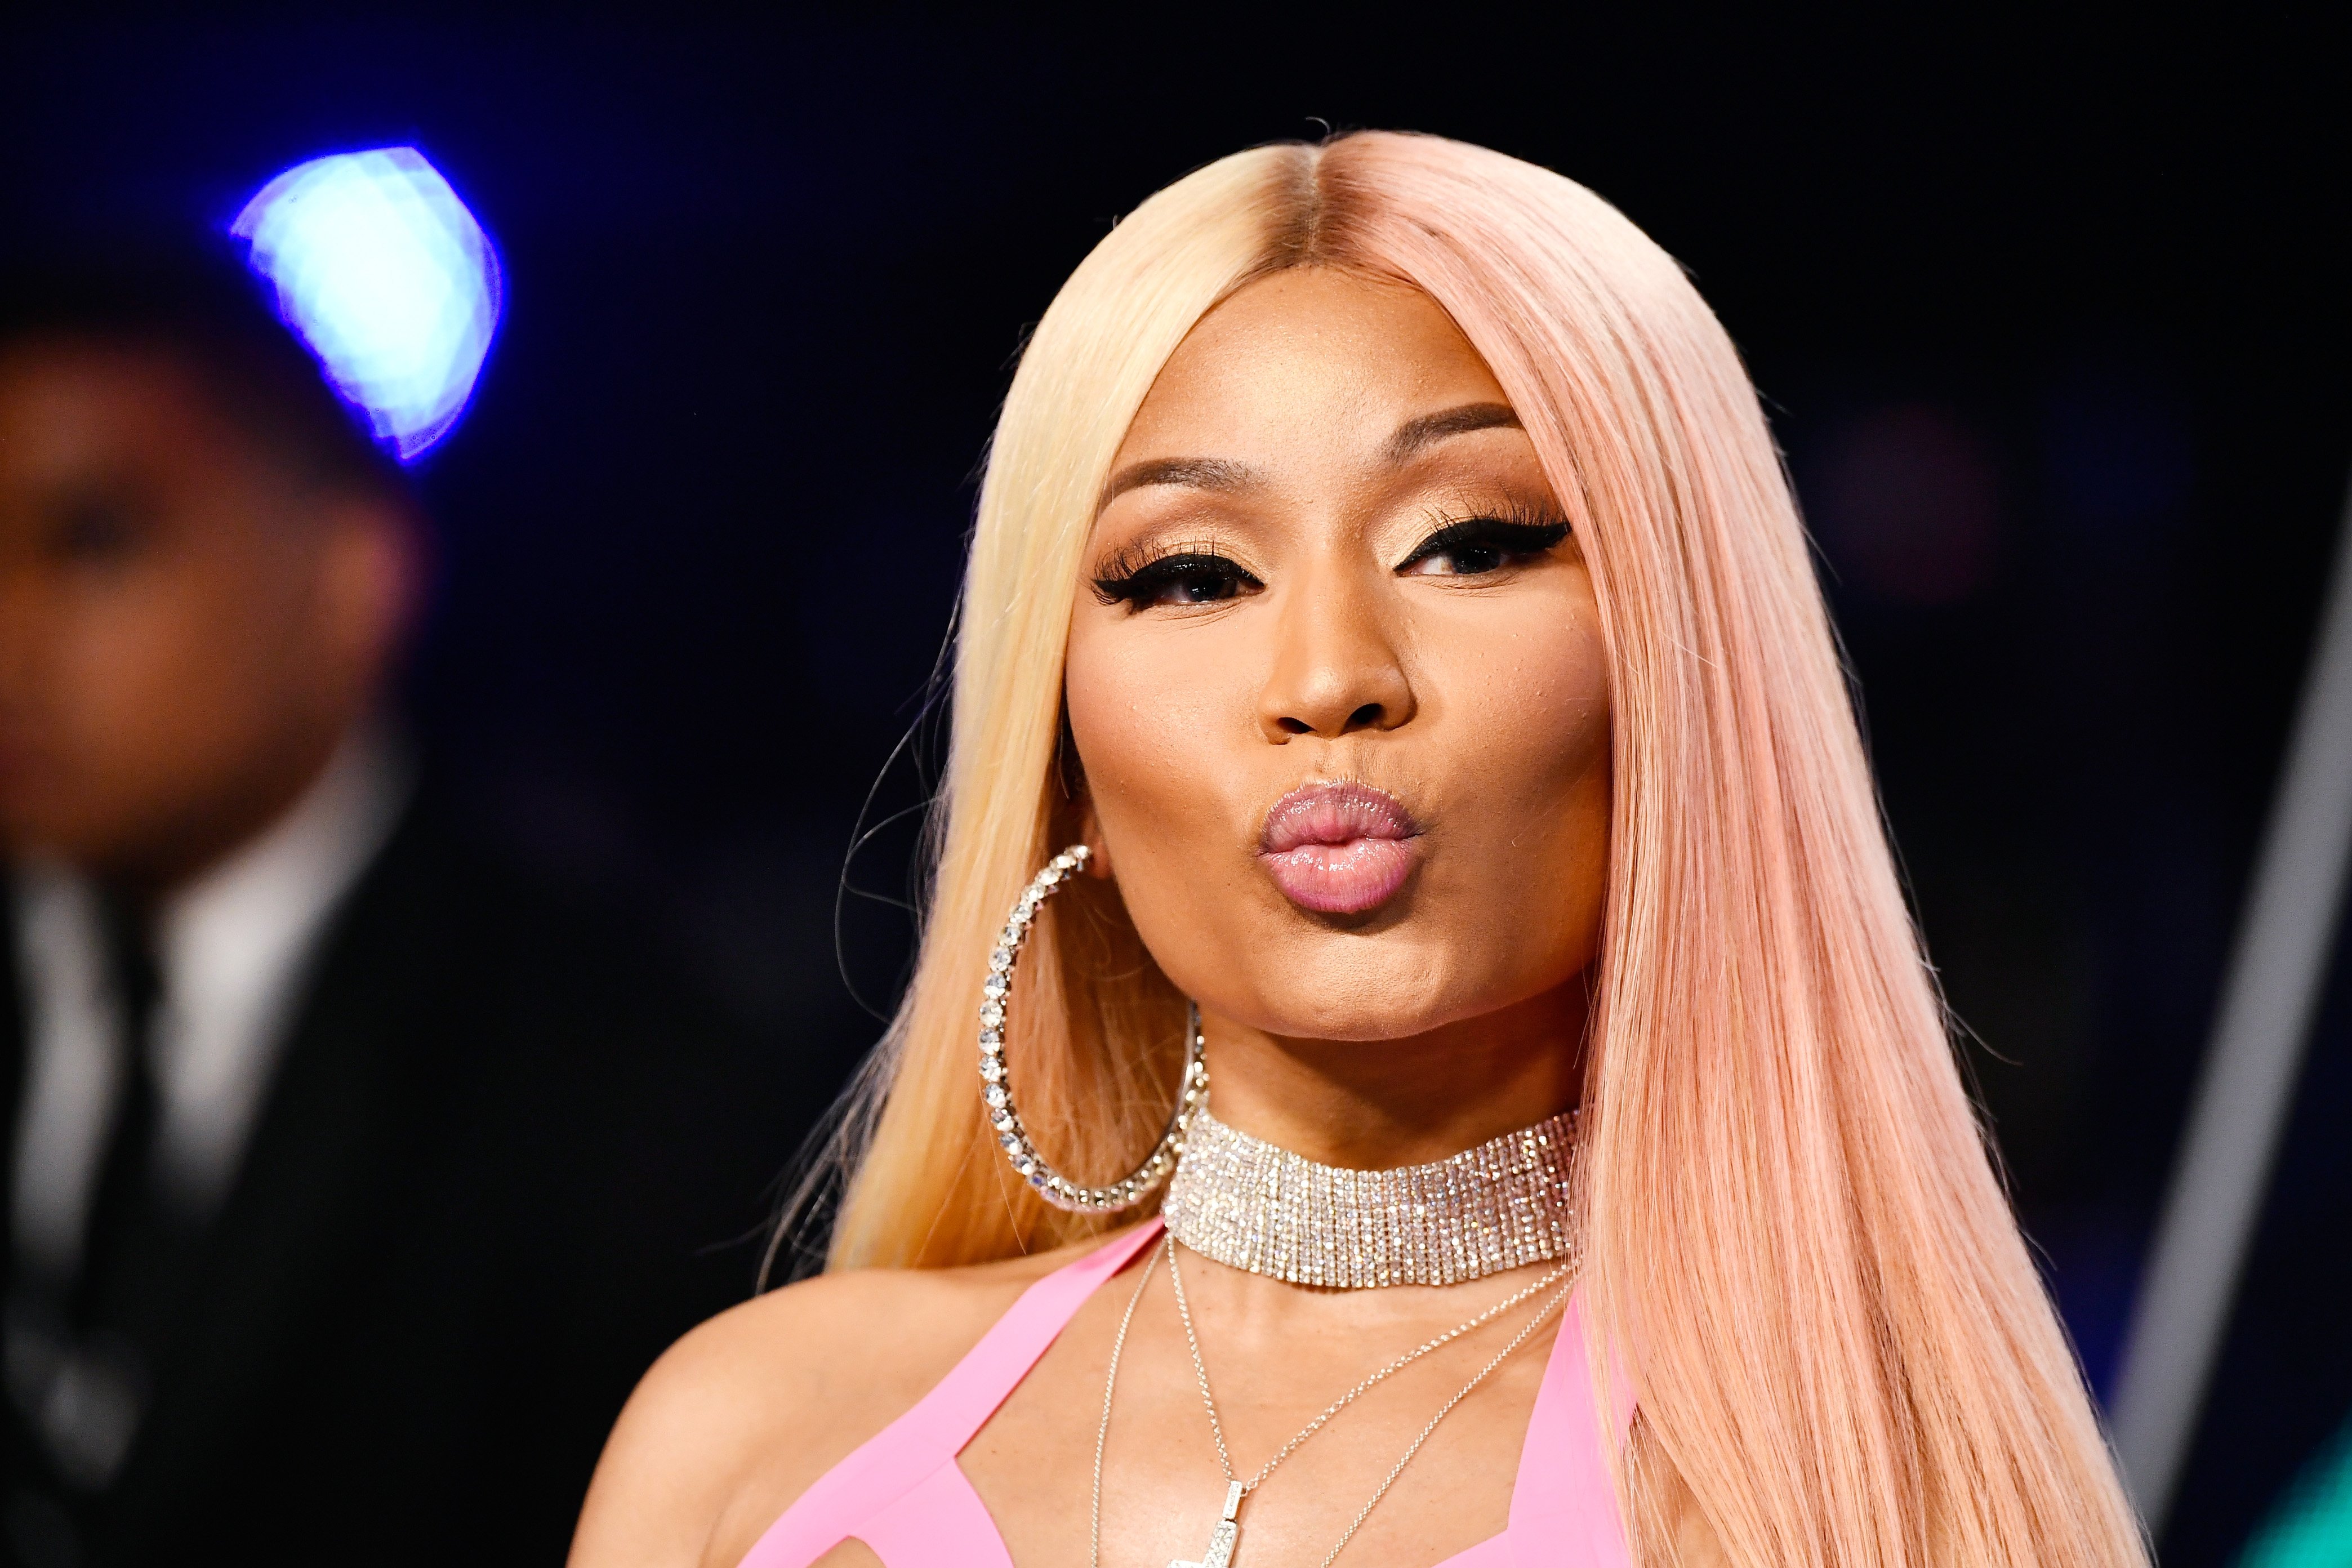 Nicki Minaj attends the 2017 MTV Video Music Awards at The Forum on August 27, 2017 in Inglewood, California. | Source: Getty Images